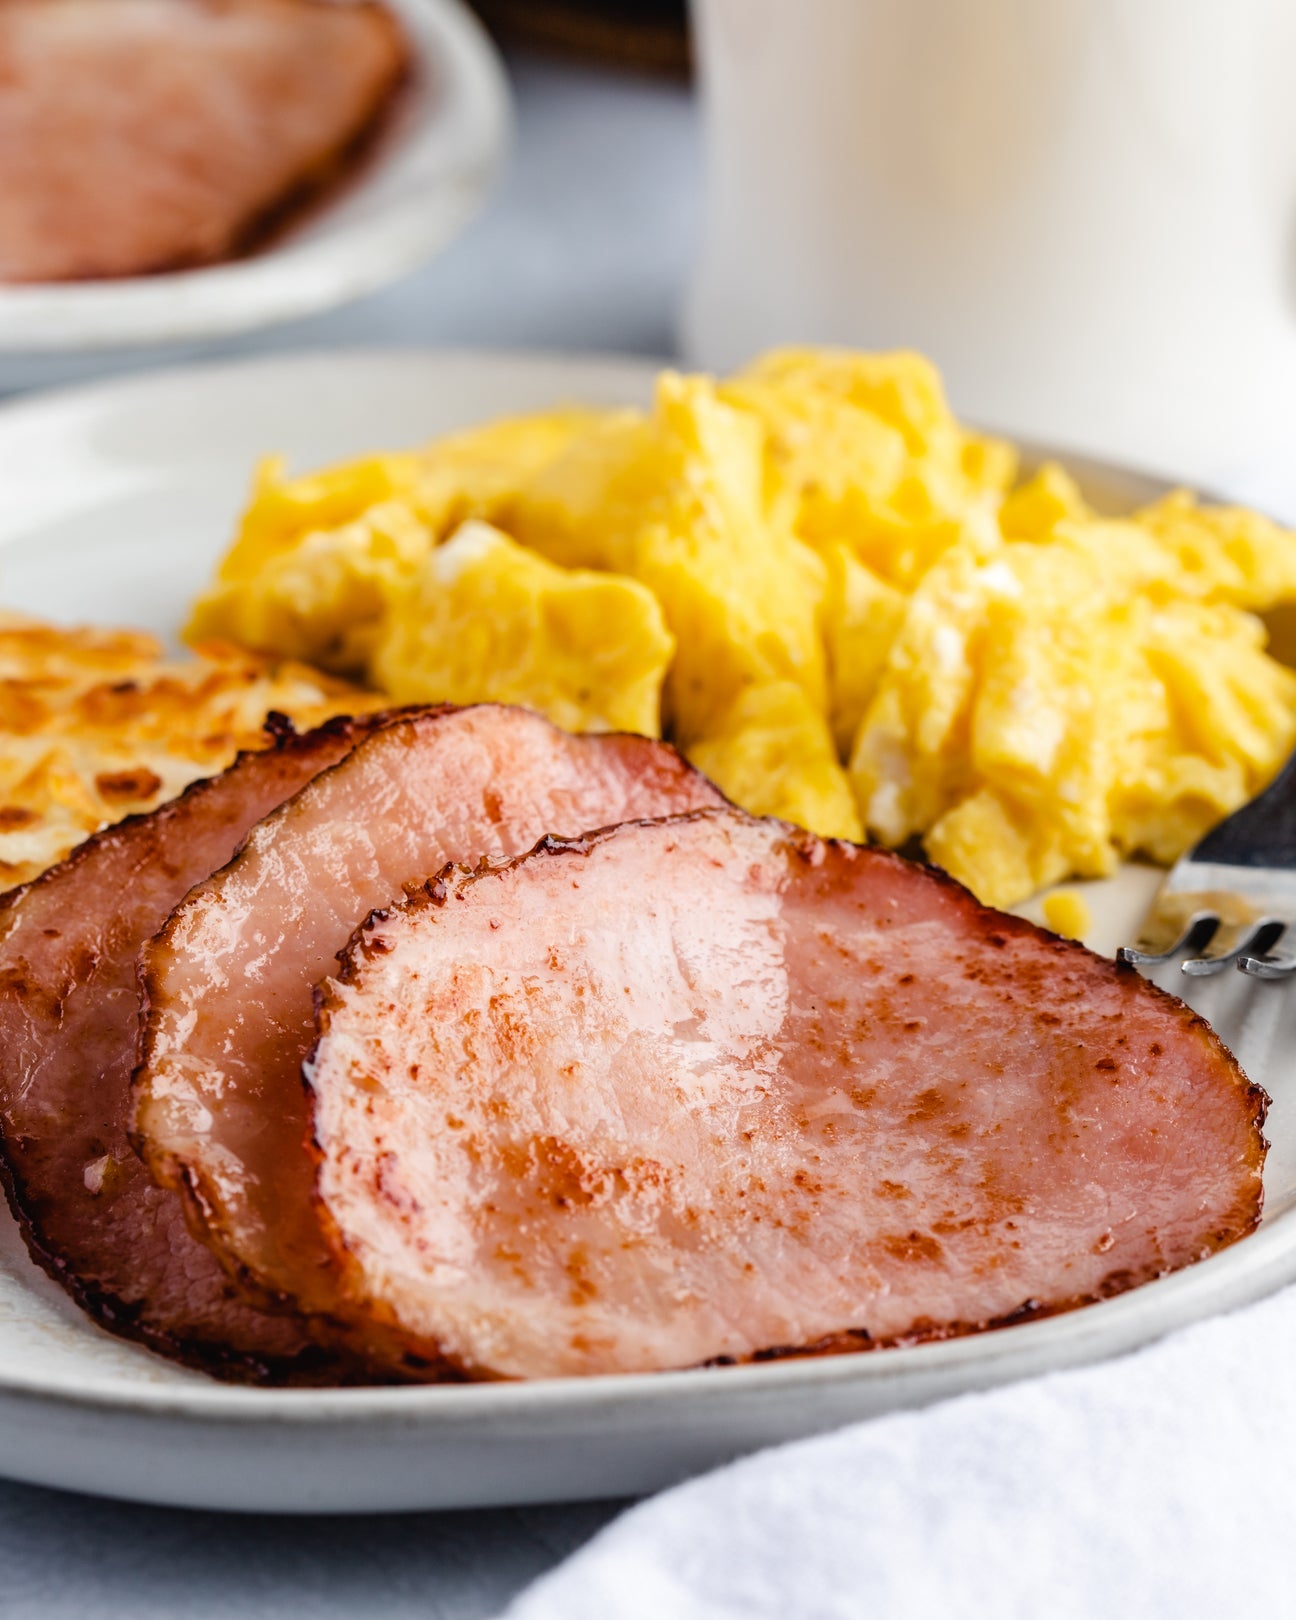 Canadian Bacon on a Breakfast Plate with eggs